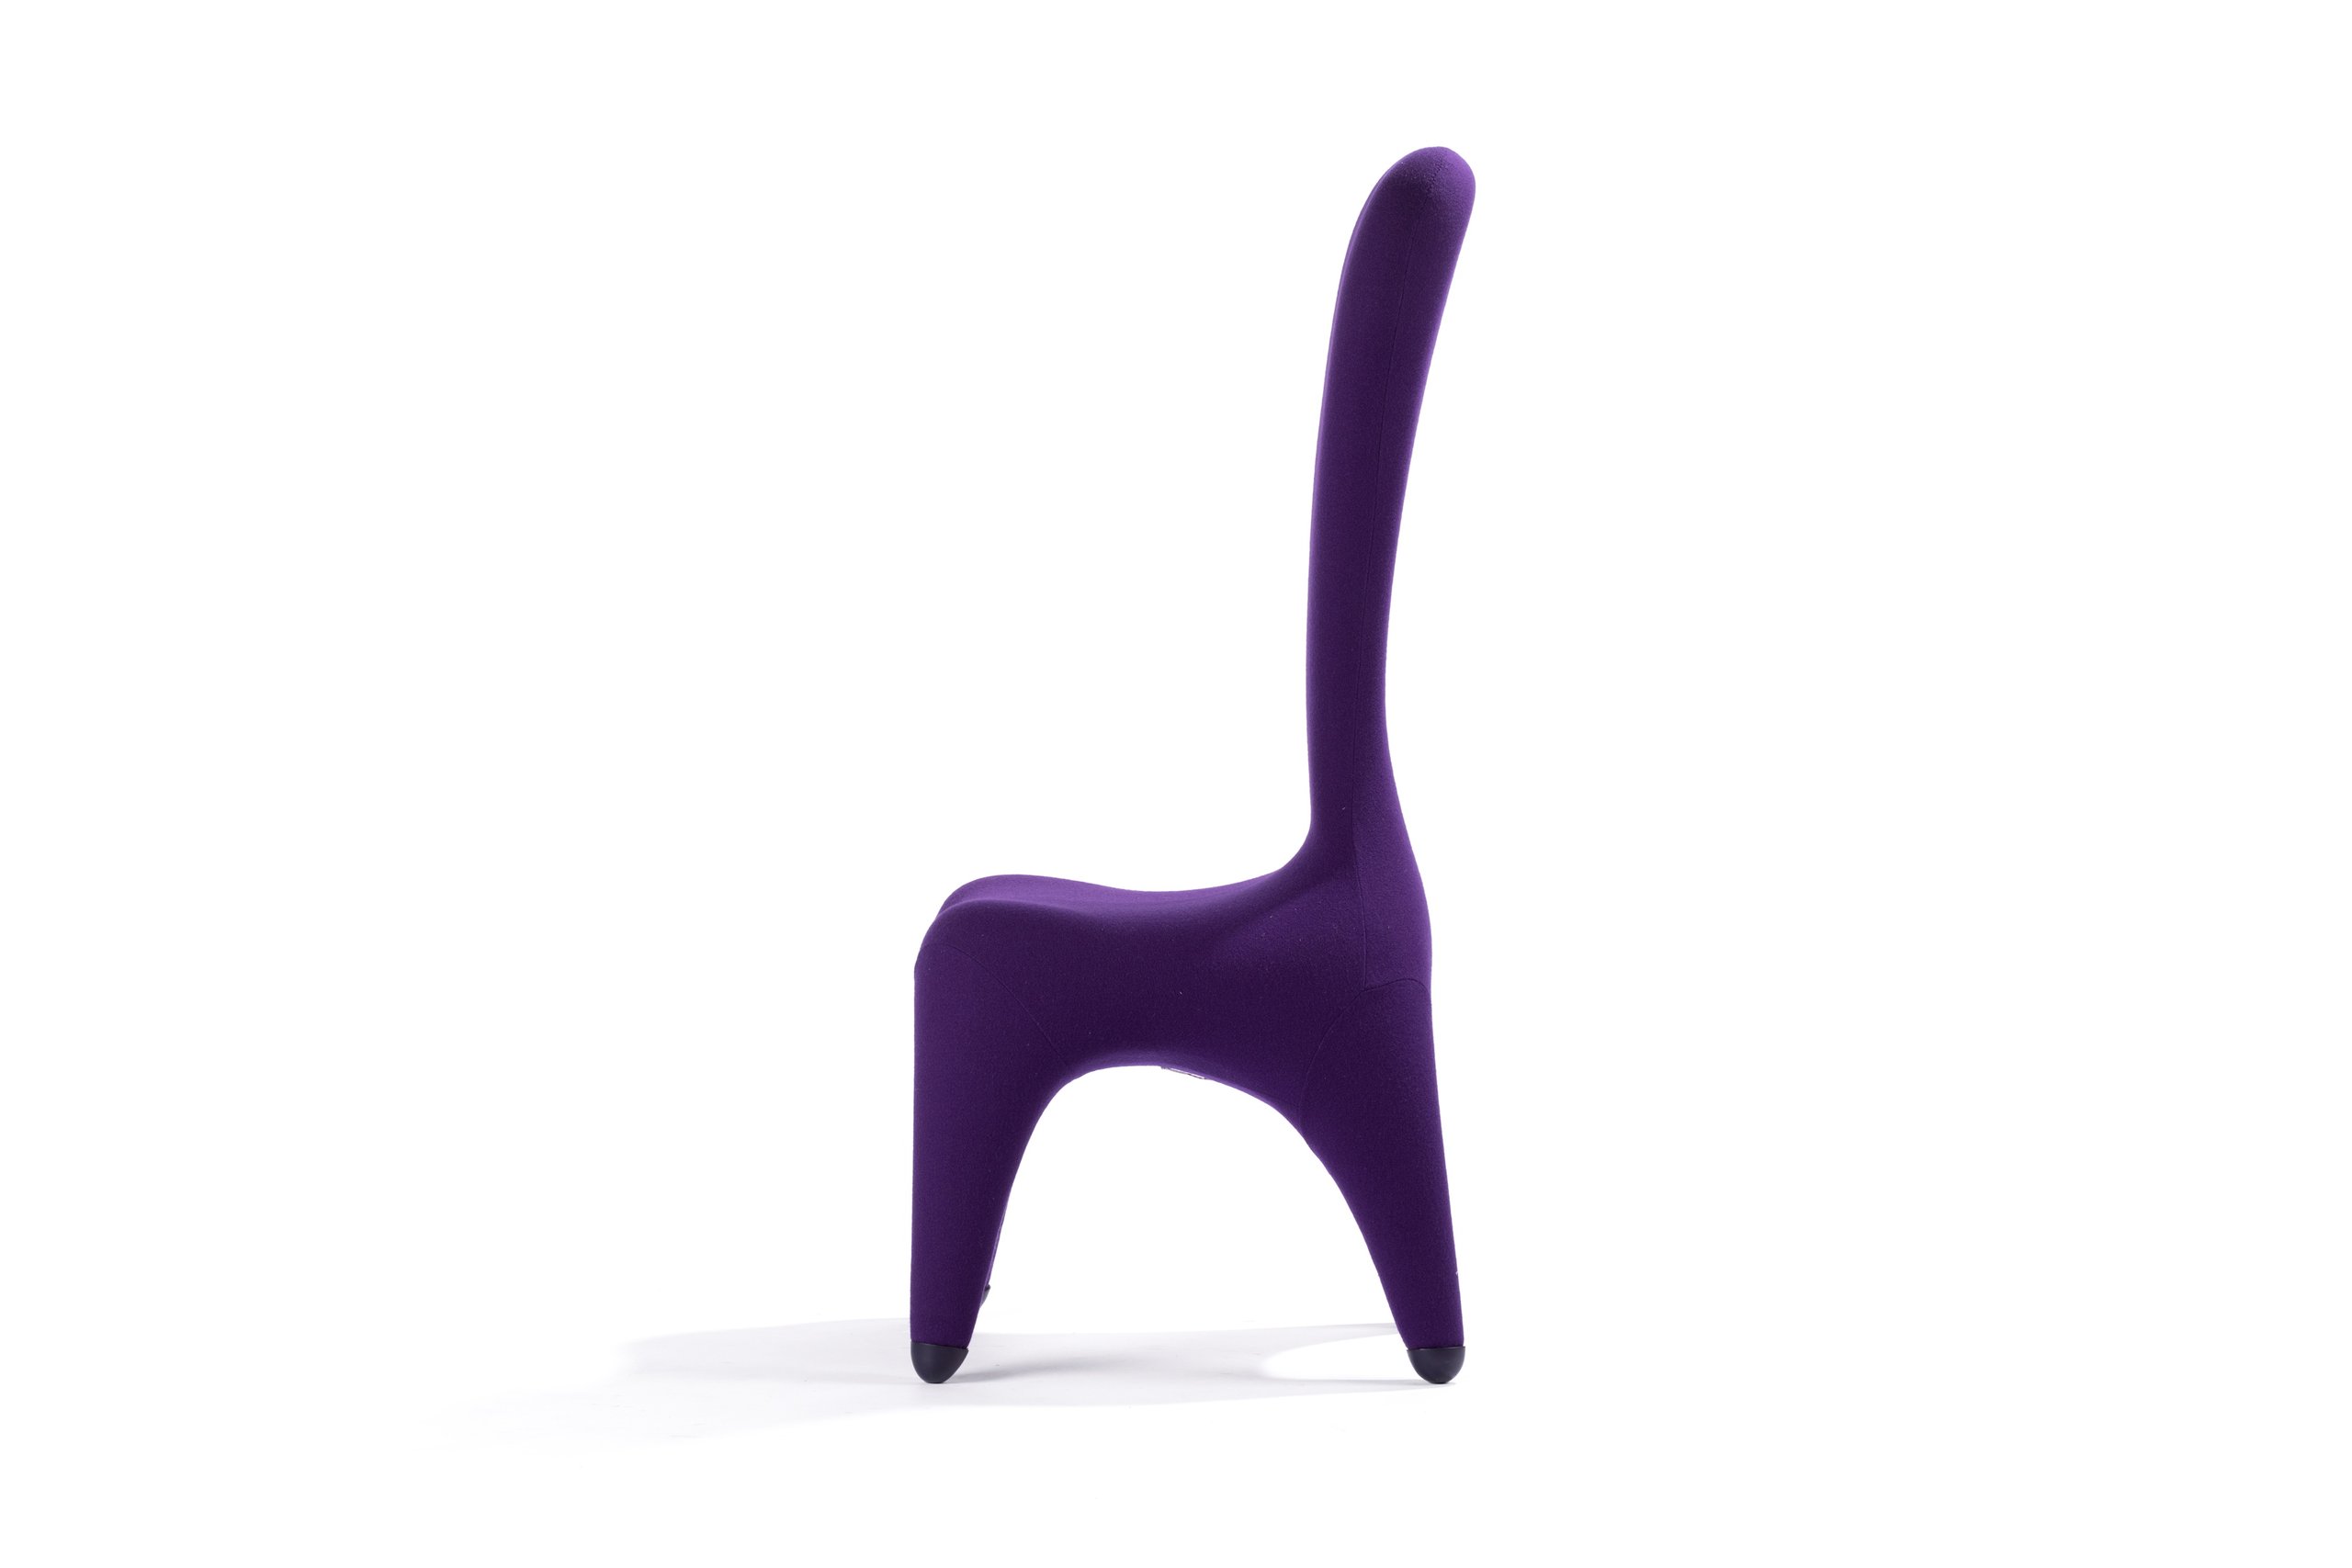 'Pepe' chair designed by Christopher Connell